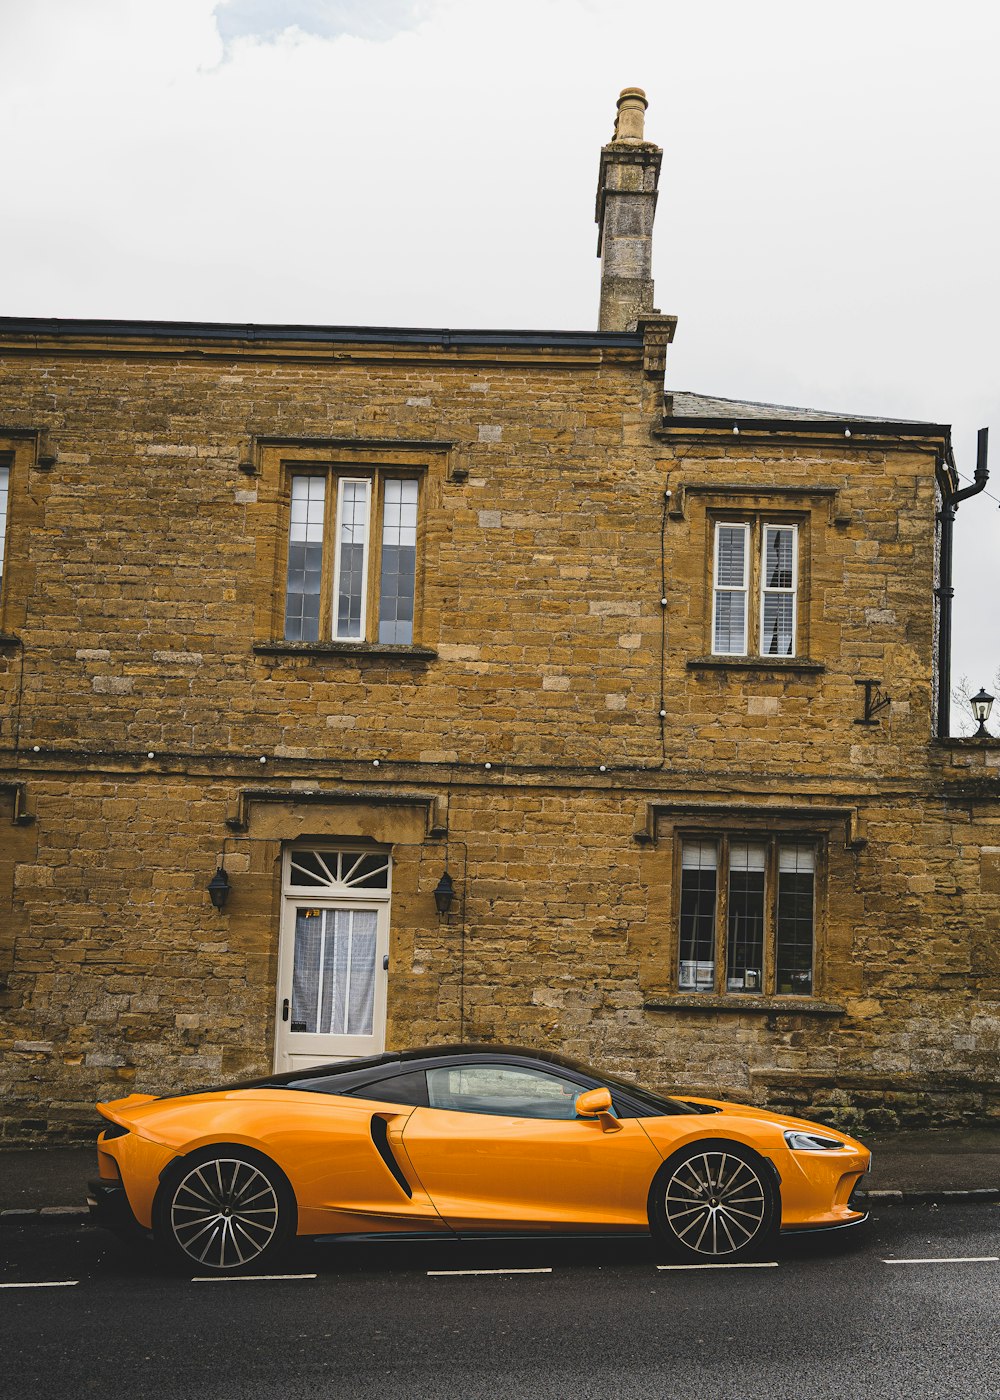 an orange sports car parked in front of a brick building